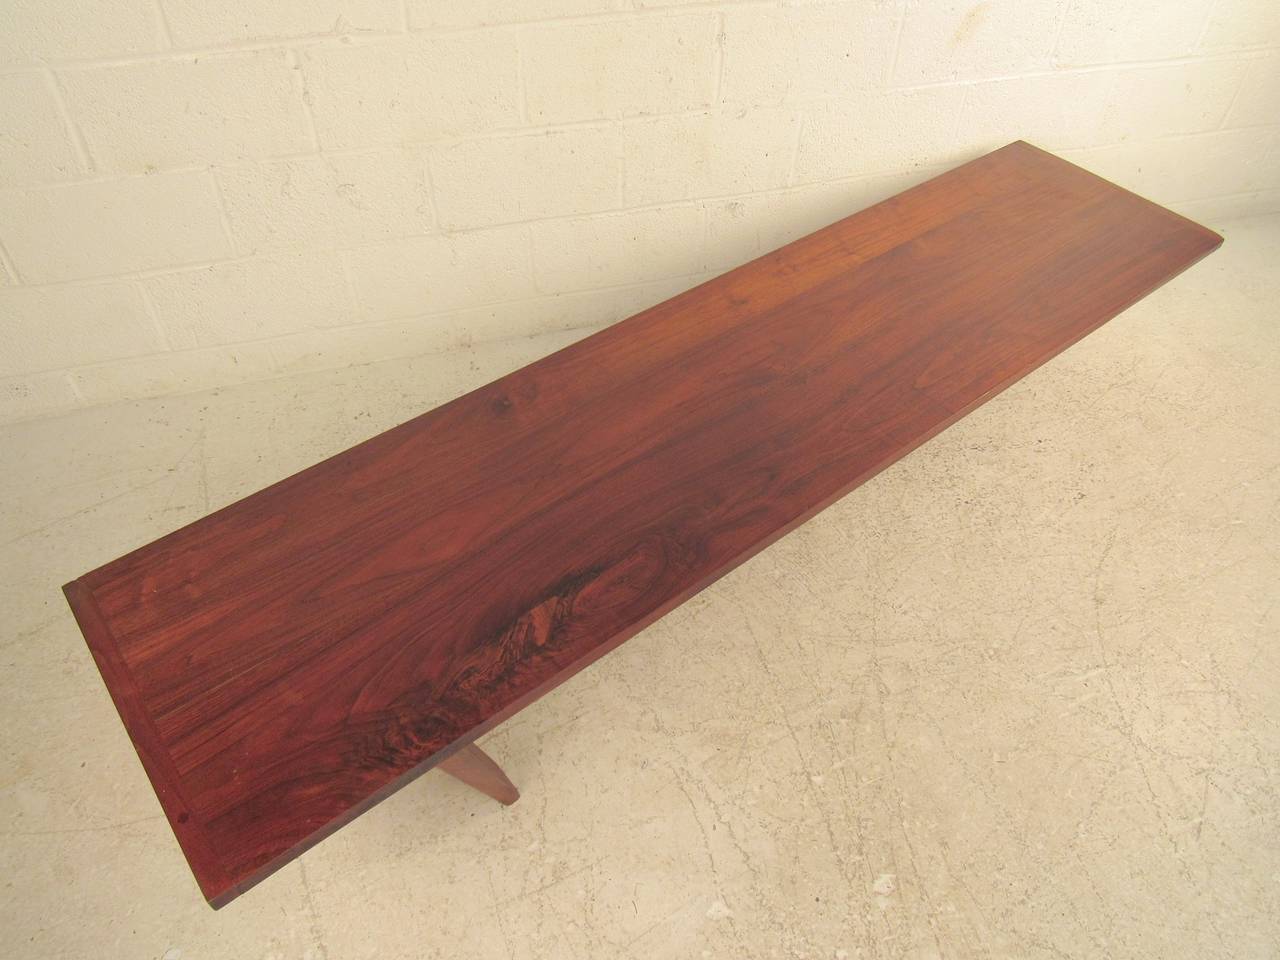 Beautiful Midcentury coffee table designed and inscribed by artist Robert Jay Lawrence in 1959. Unusual three leg construction with rich walnut top. For use as a coffee table or bench. A special, one of a kind piece.

(Please confirm item